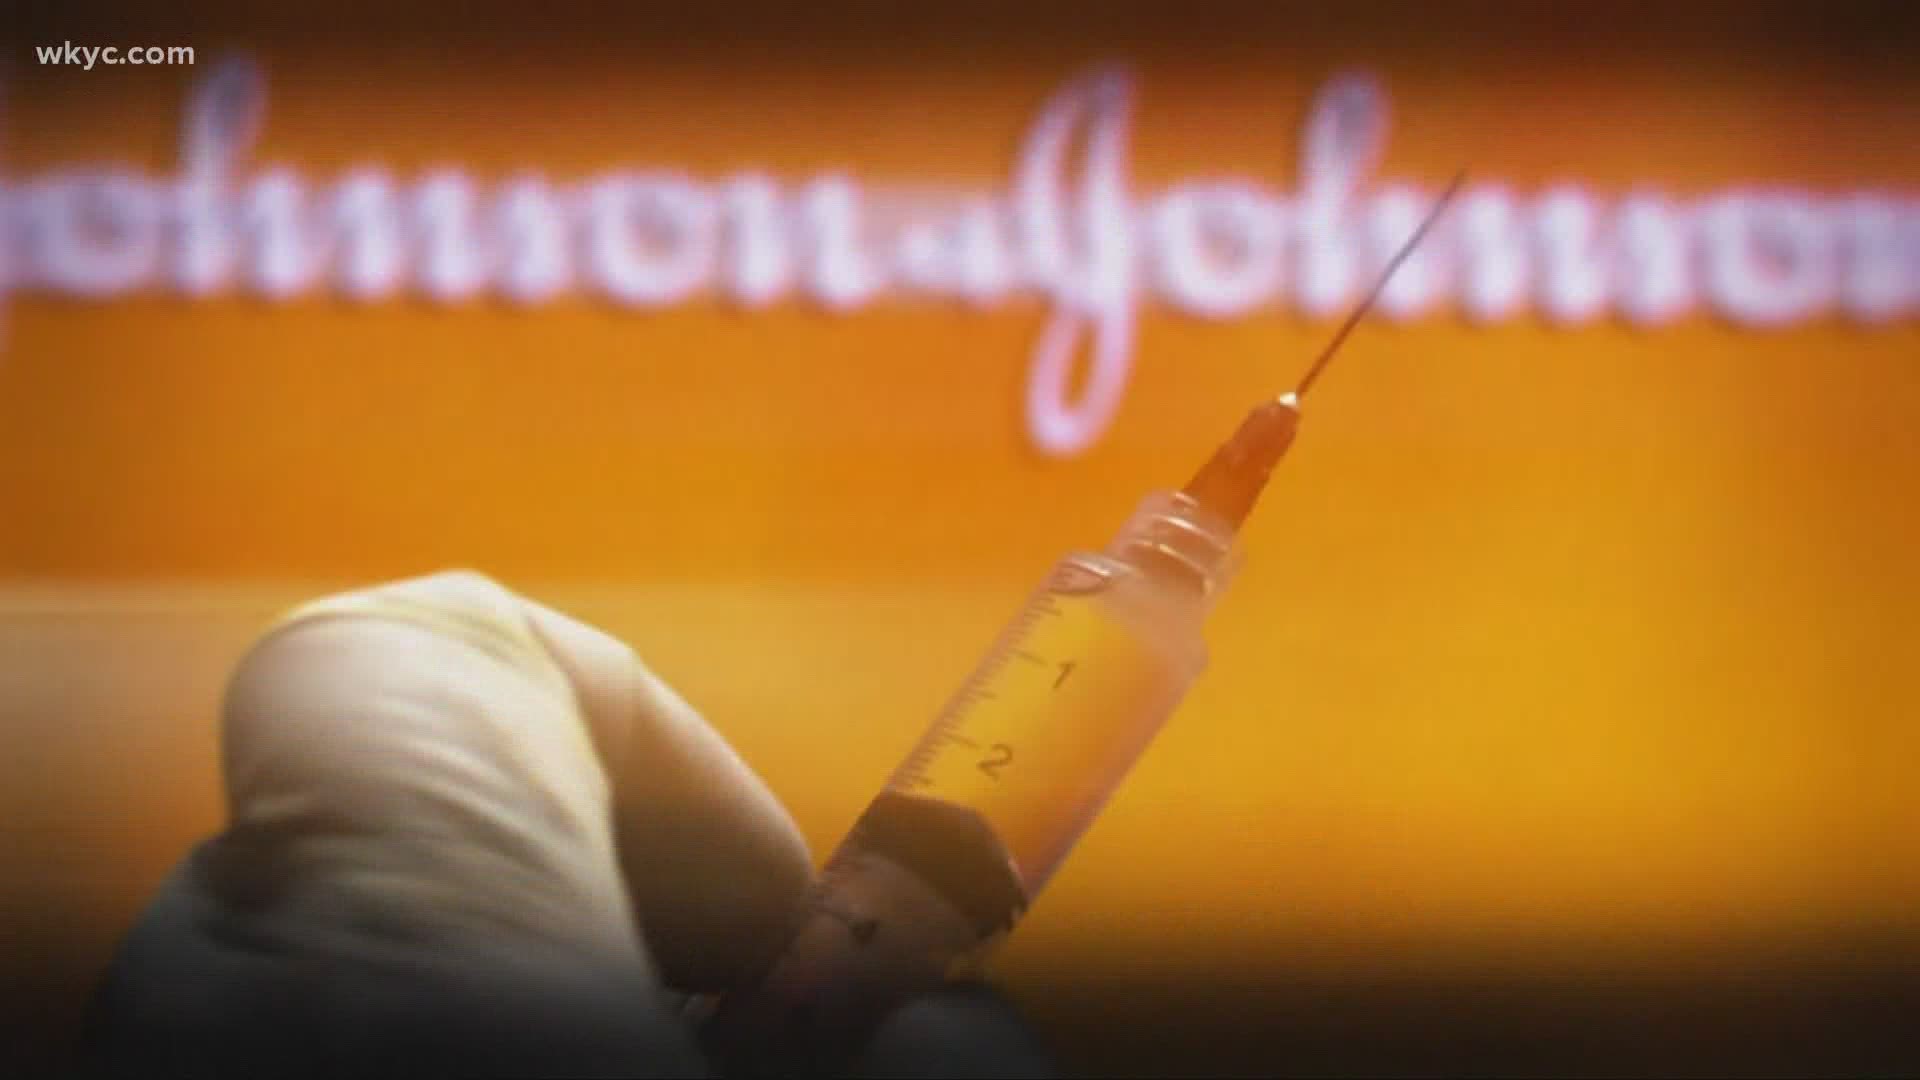 If approved later this week, Johnson and Johnson's single dose shot would be the third in the market. Monica Robins has more details.